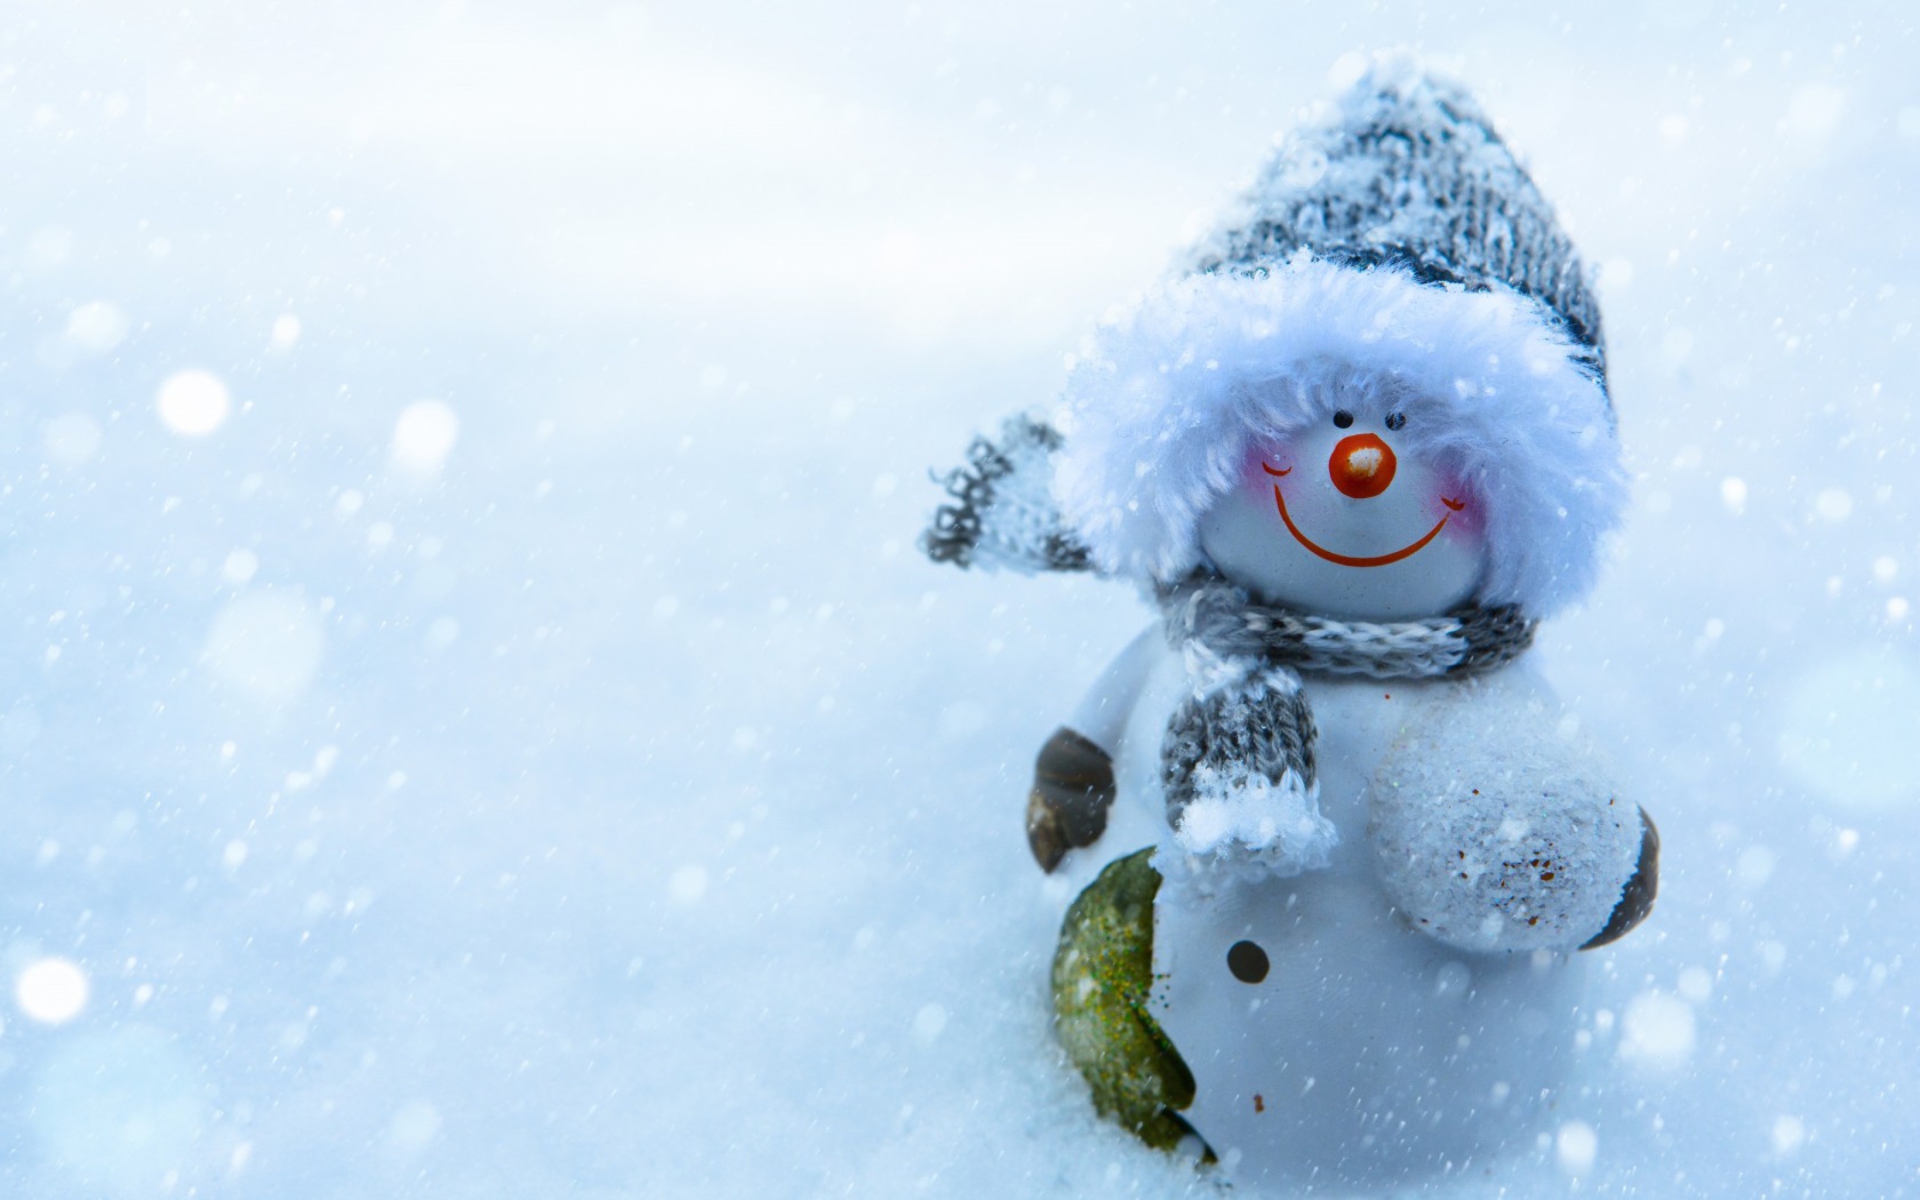 Snowman Covered With Snowflakes wallpaper 1920x1200